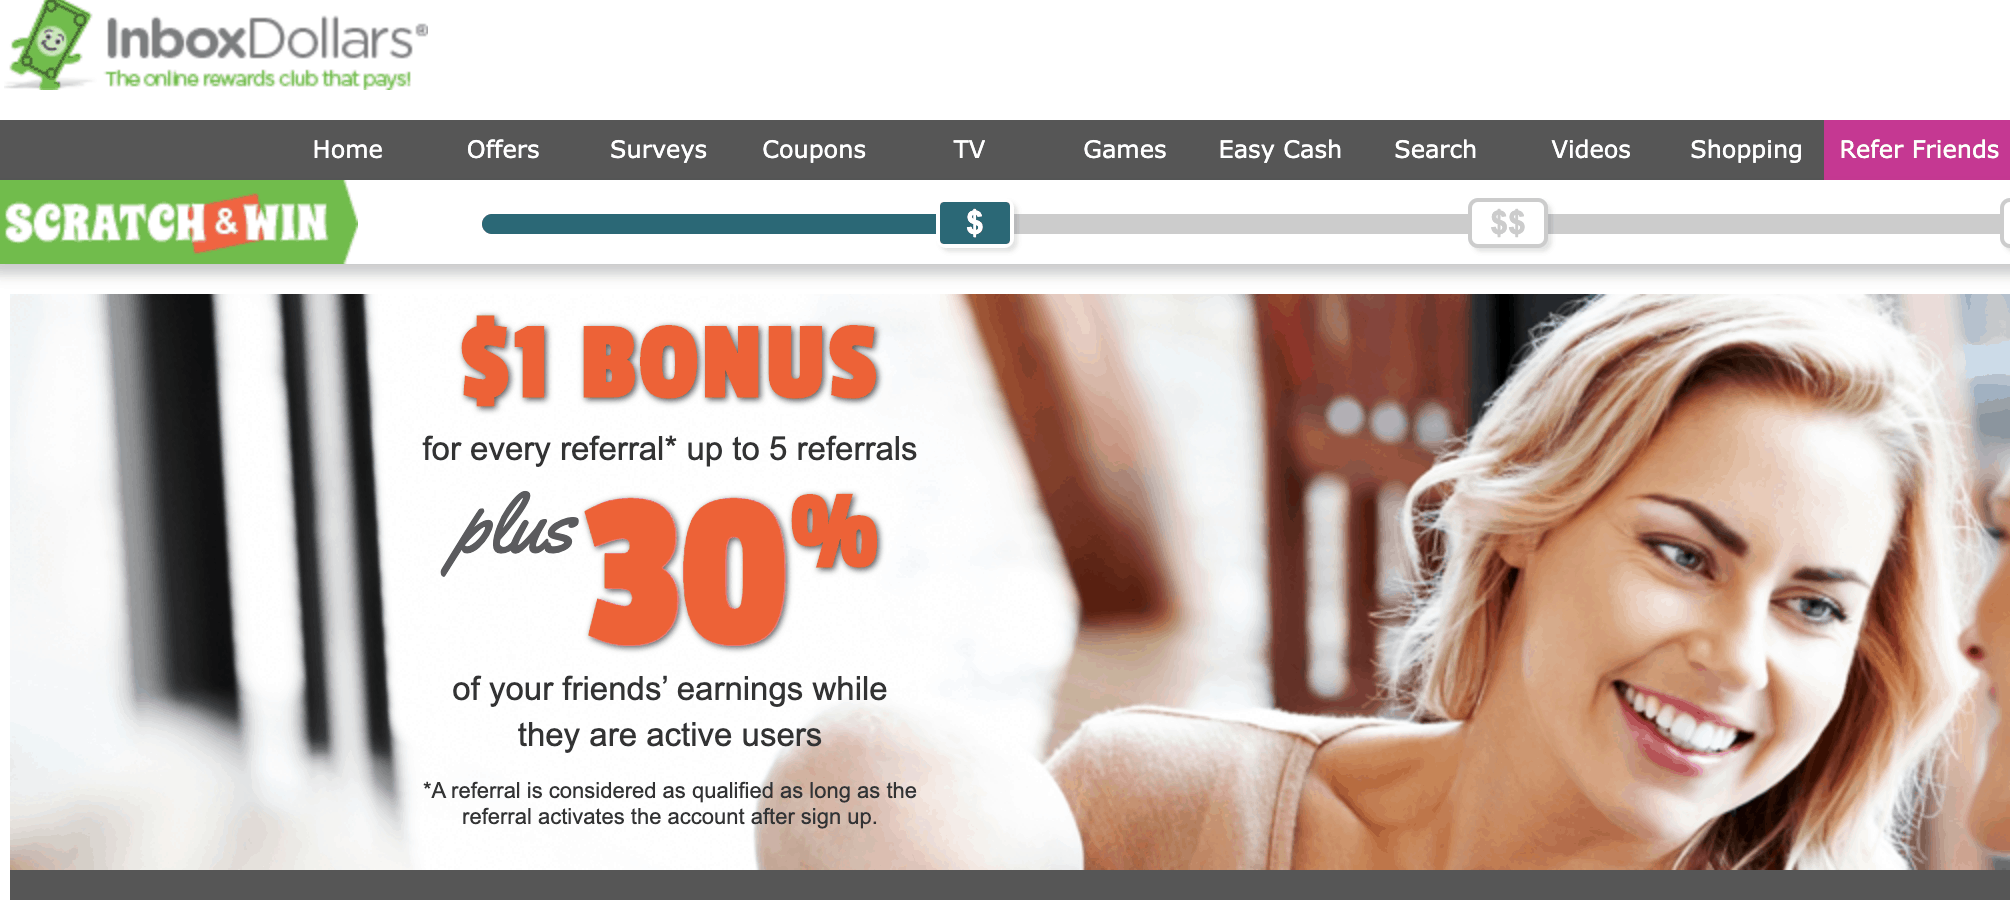 InboxDollars is one of the best referral programs that pay you cash for referring your friends.